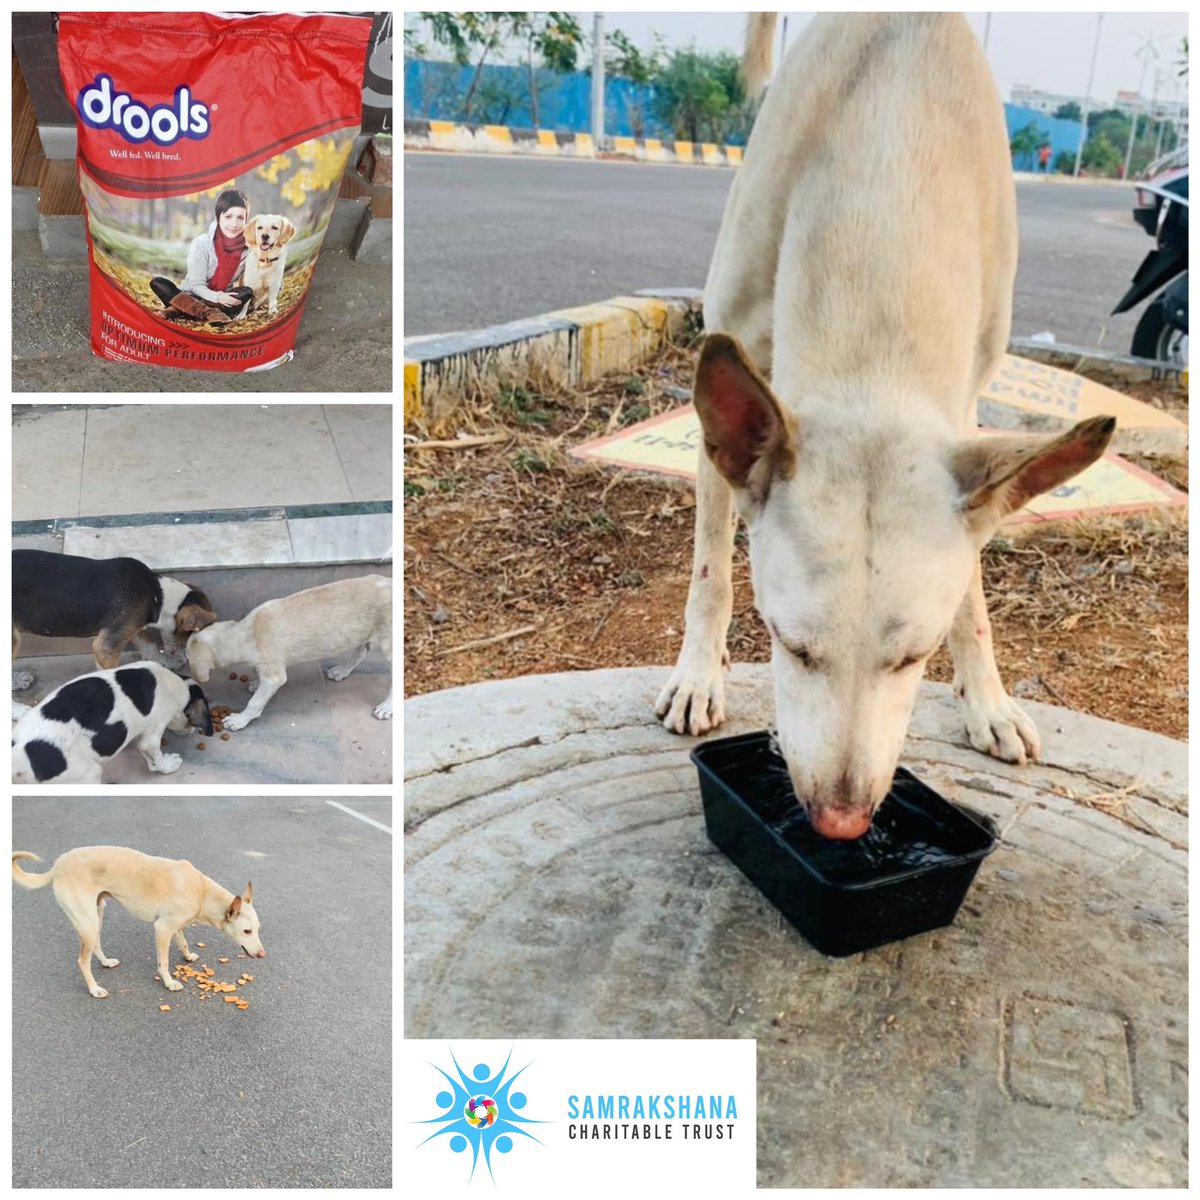 Hunger is a universal feeling of all living beings. Let’s open our hearts and feed every stray dog. 

Online Bank Transfer:

A/C Name: V Sravan Kumar 
A/c: 5512597277
Bank Name: Kotak bank
IFSC code: KKBK0007462

PhonePe/Gpay:  9704702306

#feeddogs #covid19helpindia #samrakshana